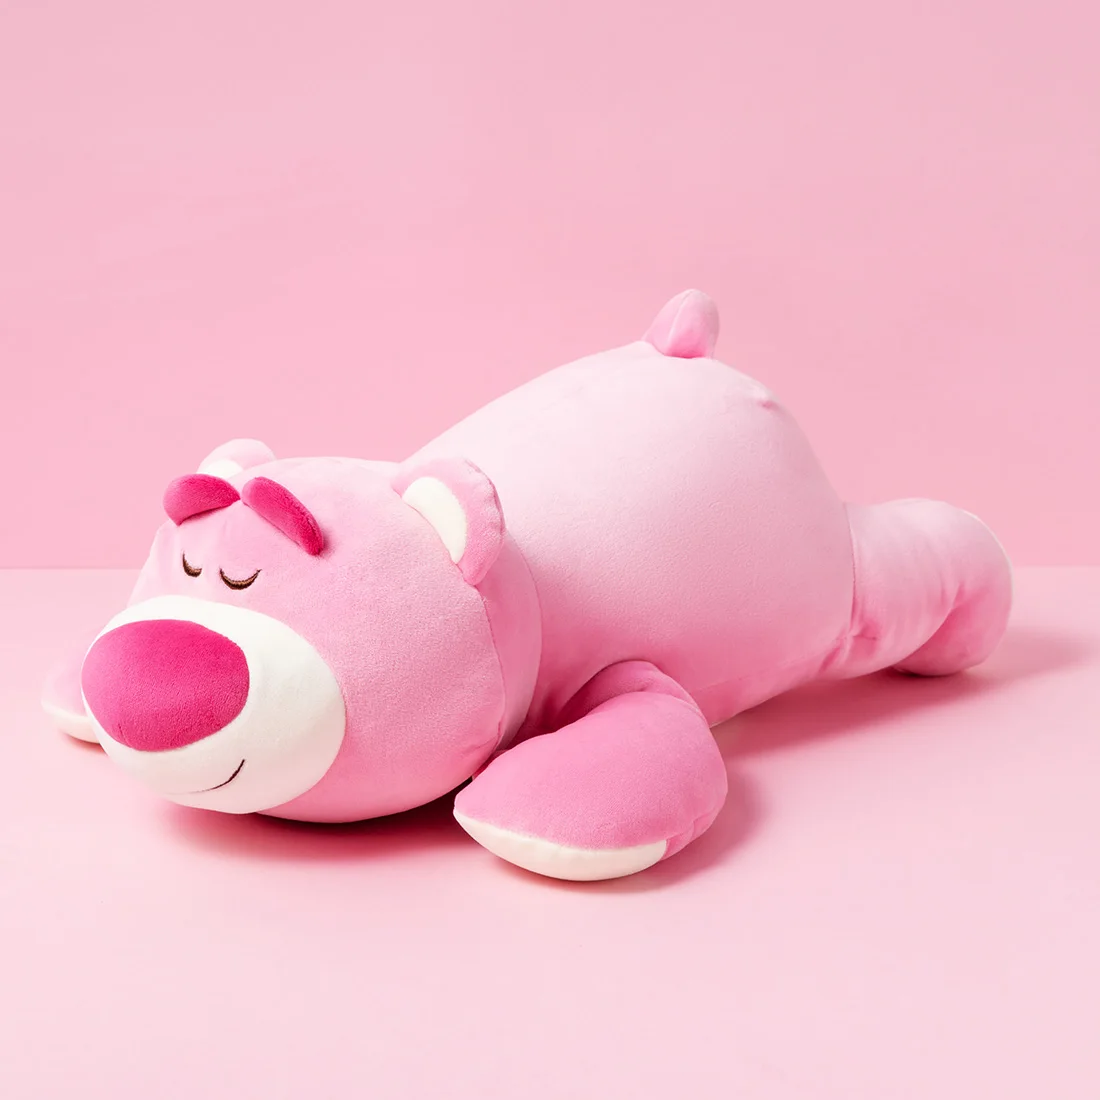 Dive into a World of Cuteness: Sale at MINISO store on AliExpress!